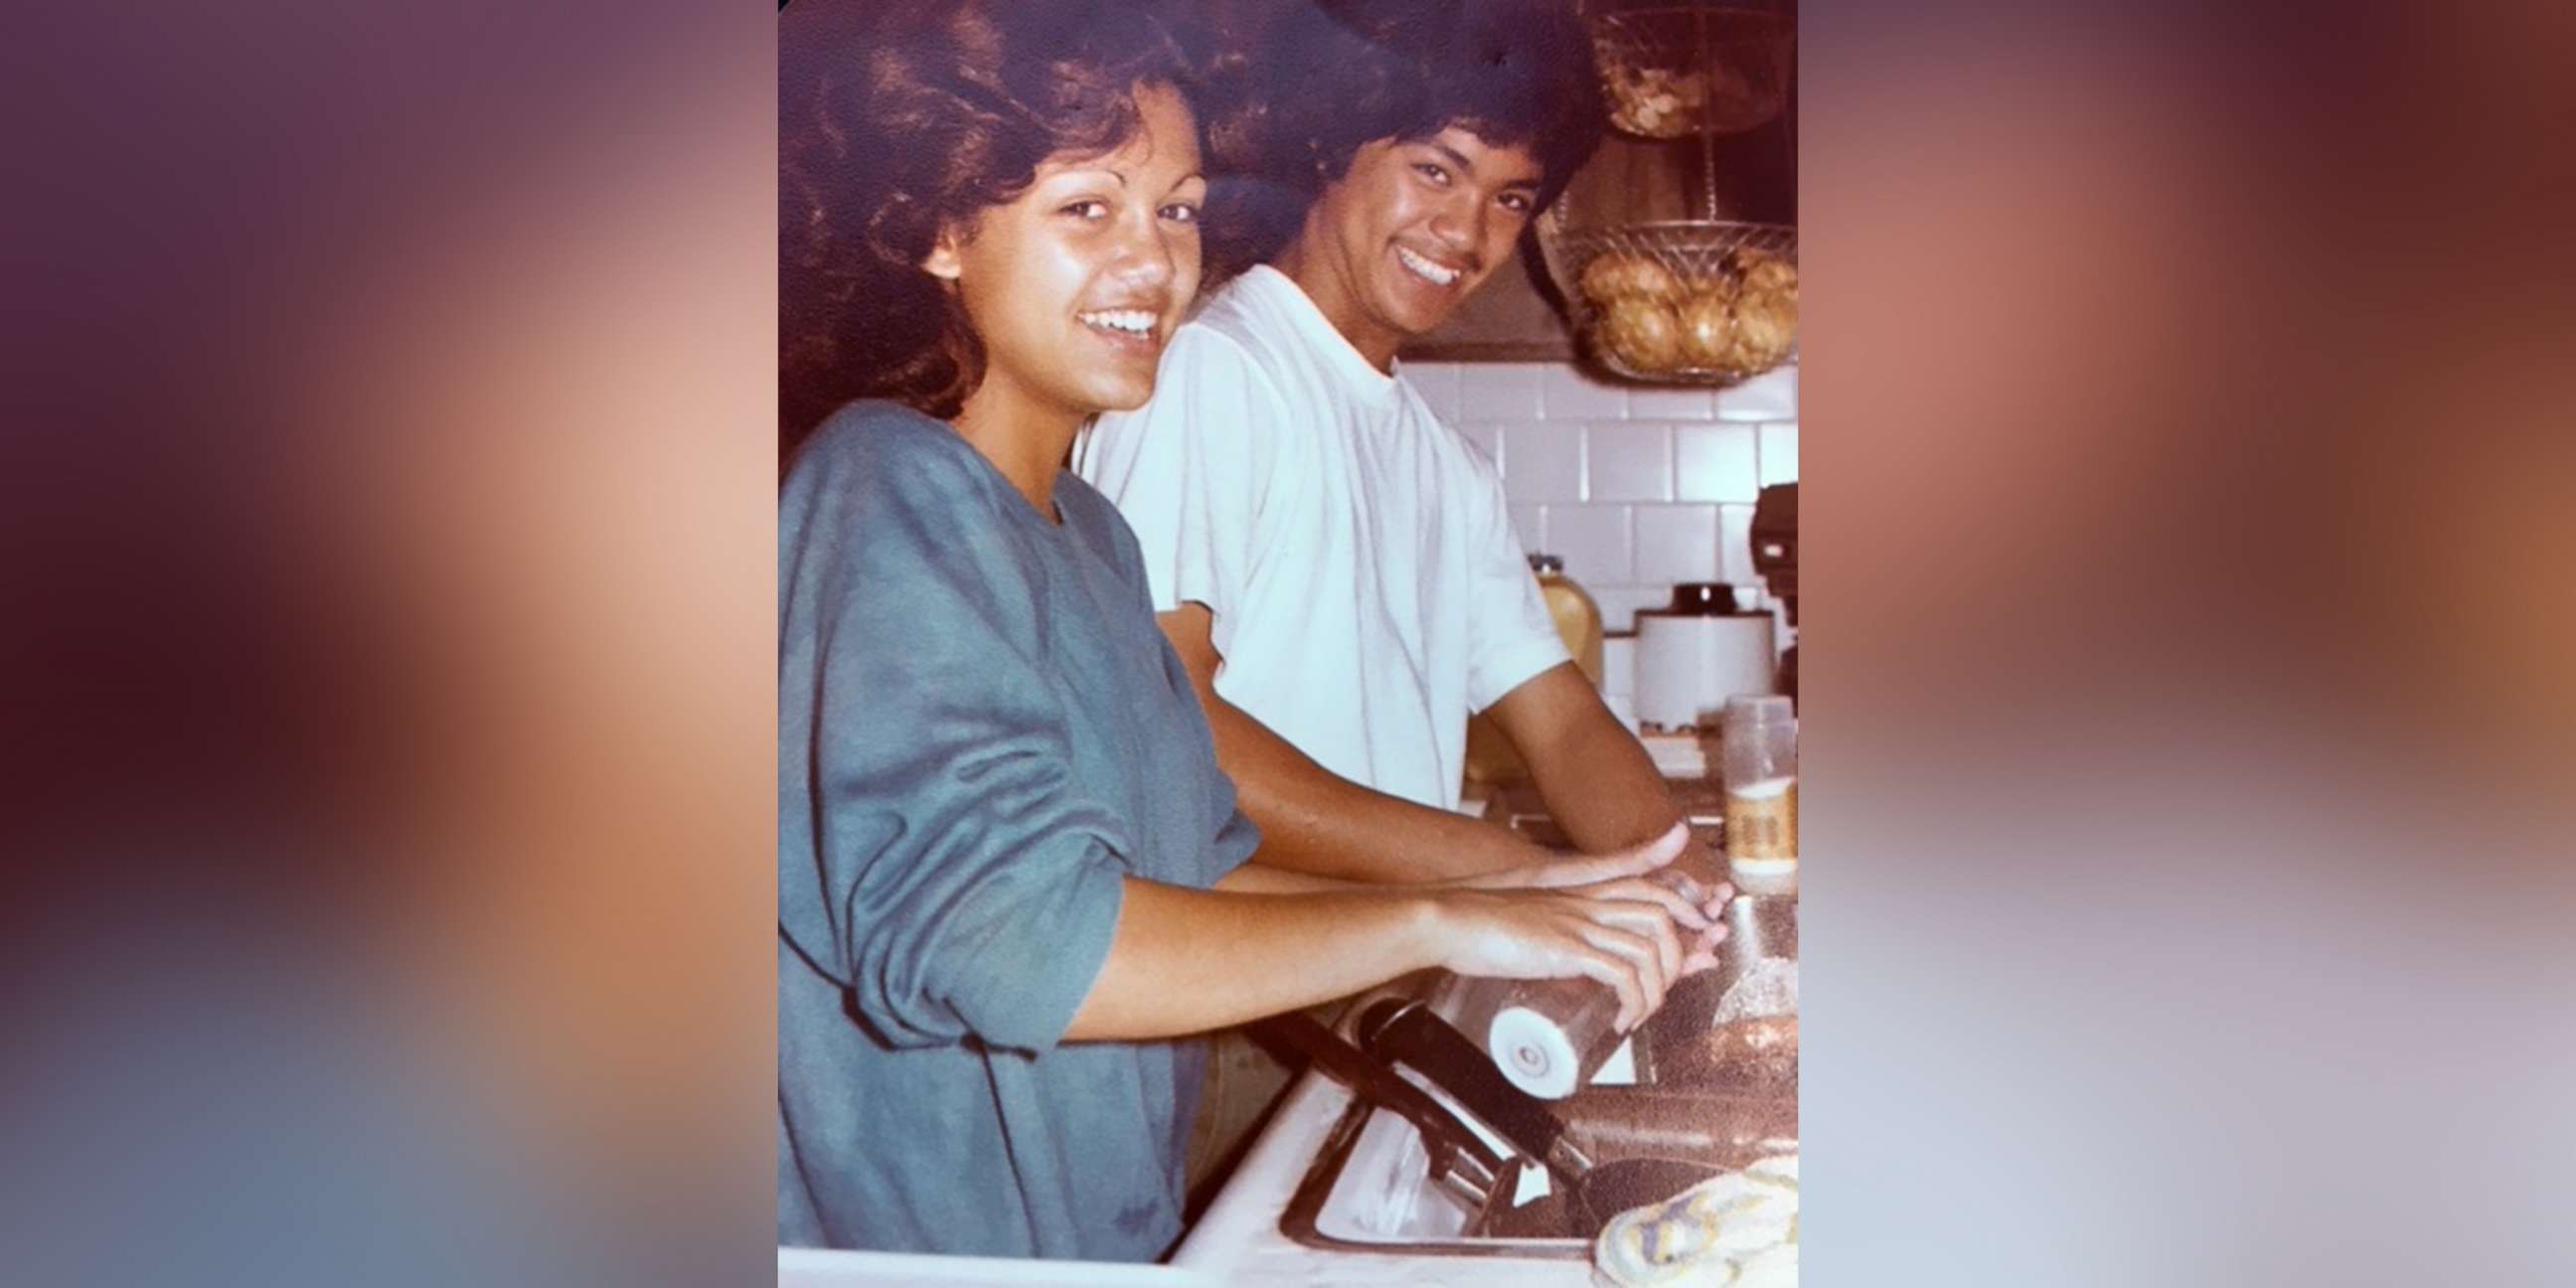 PHOTO: Fremont police released this undated photo of Jeffrey Flores Atup and Mary Jane Malatag, killed in Dec. 1982.